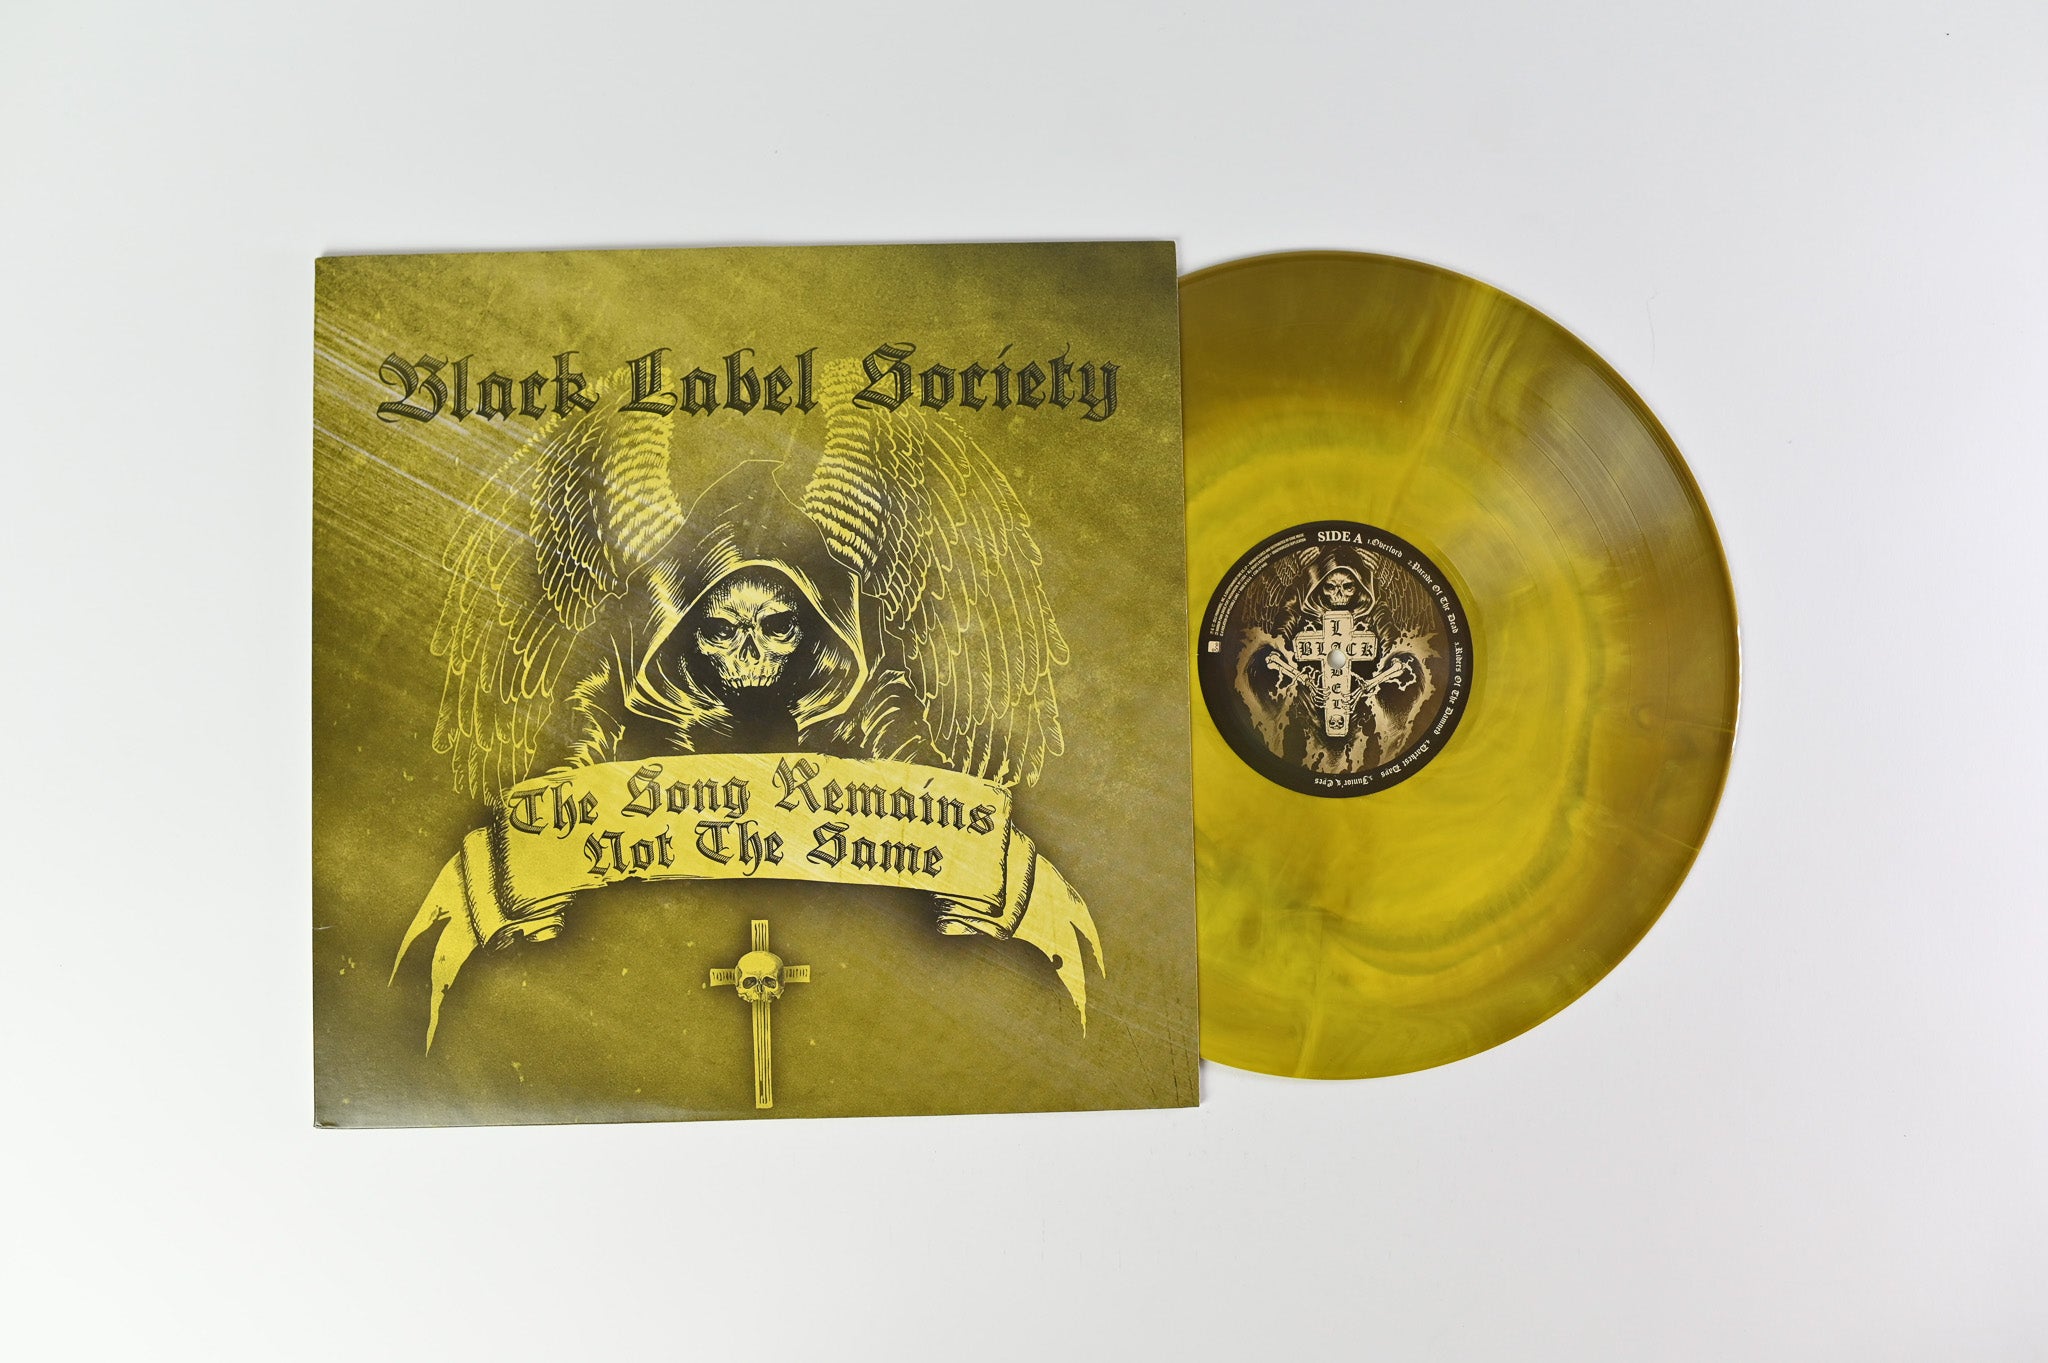 Black Label Society - The Song Remains Not The Same on eOne Starburst Vinyl